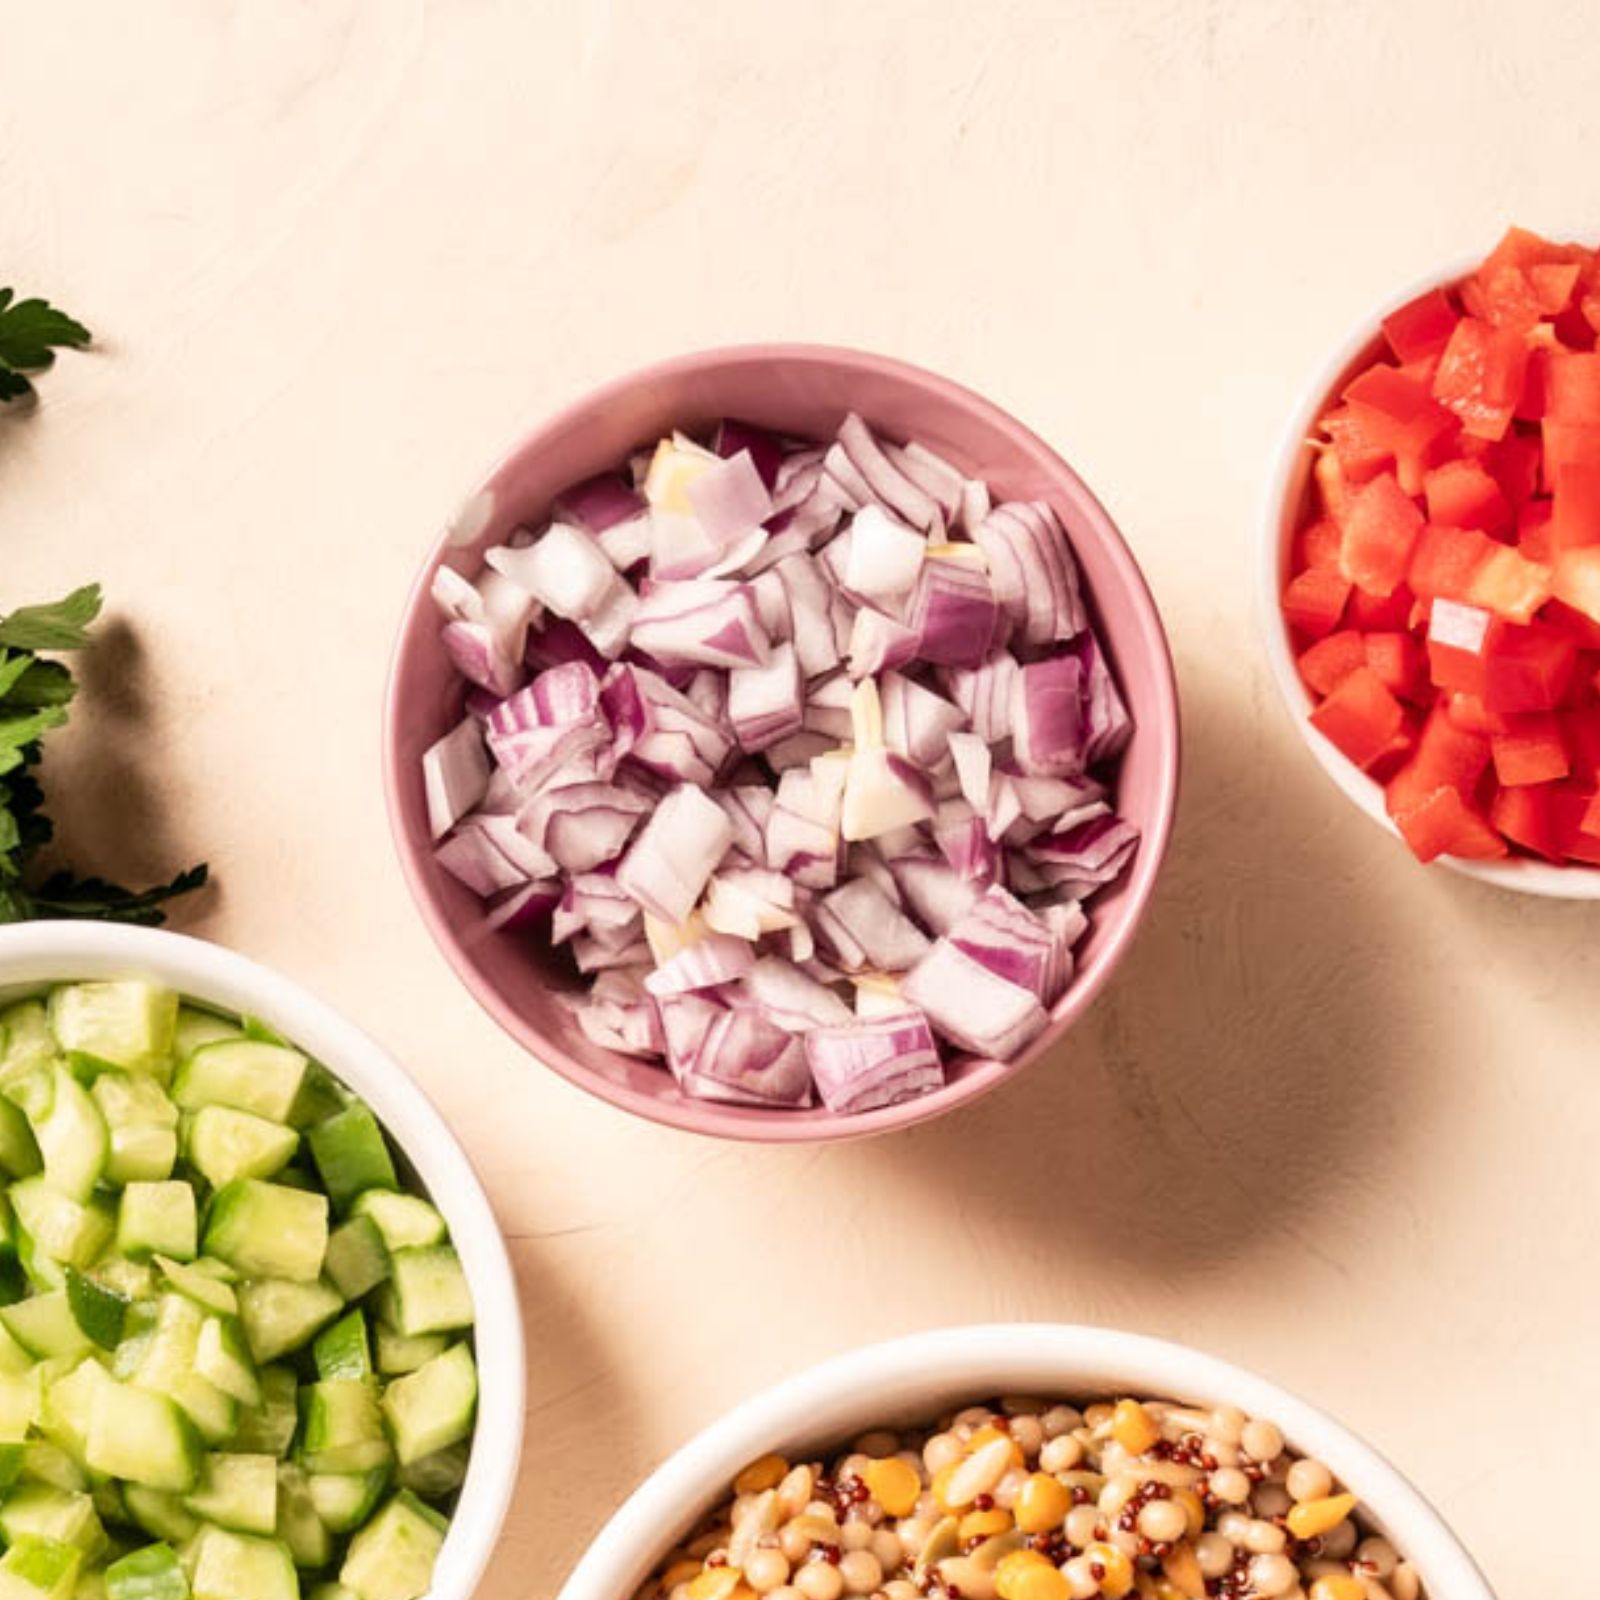 red onions in a pink bowl with other chopped veggies in bowls out of frame